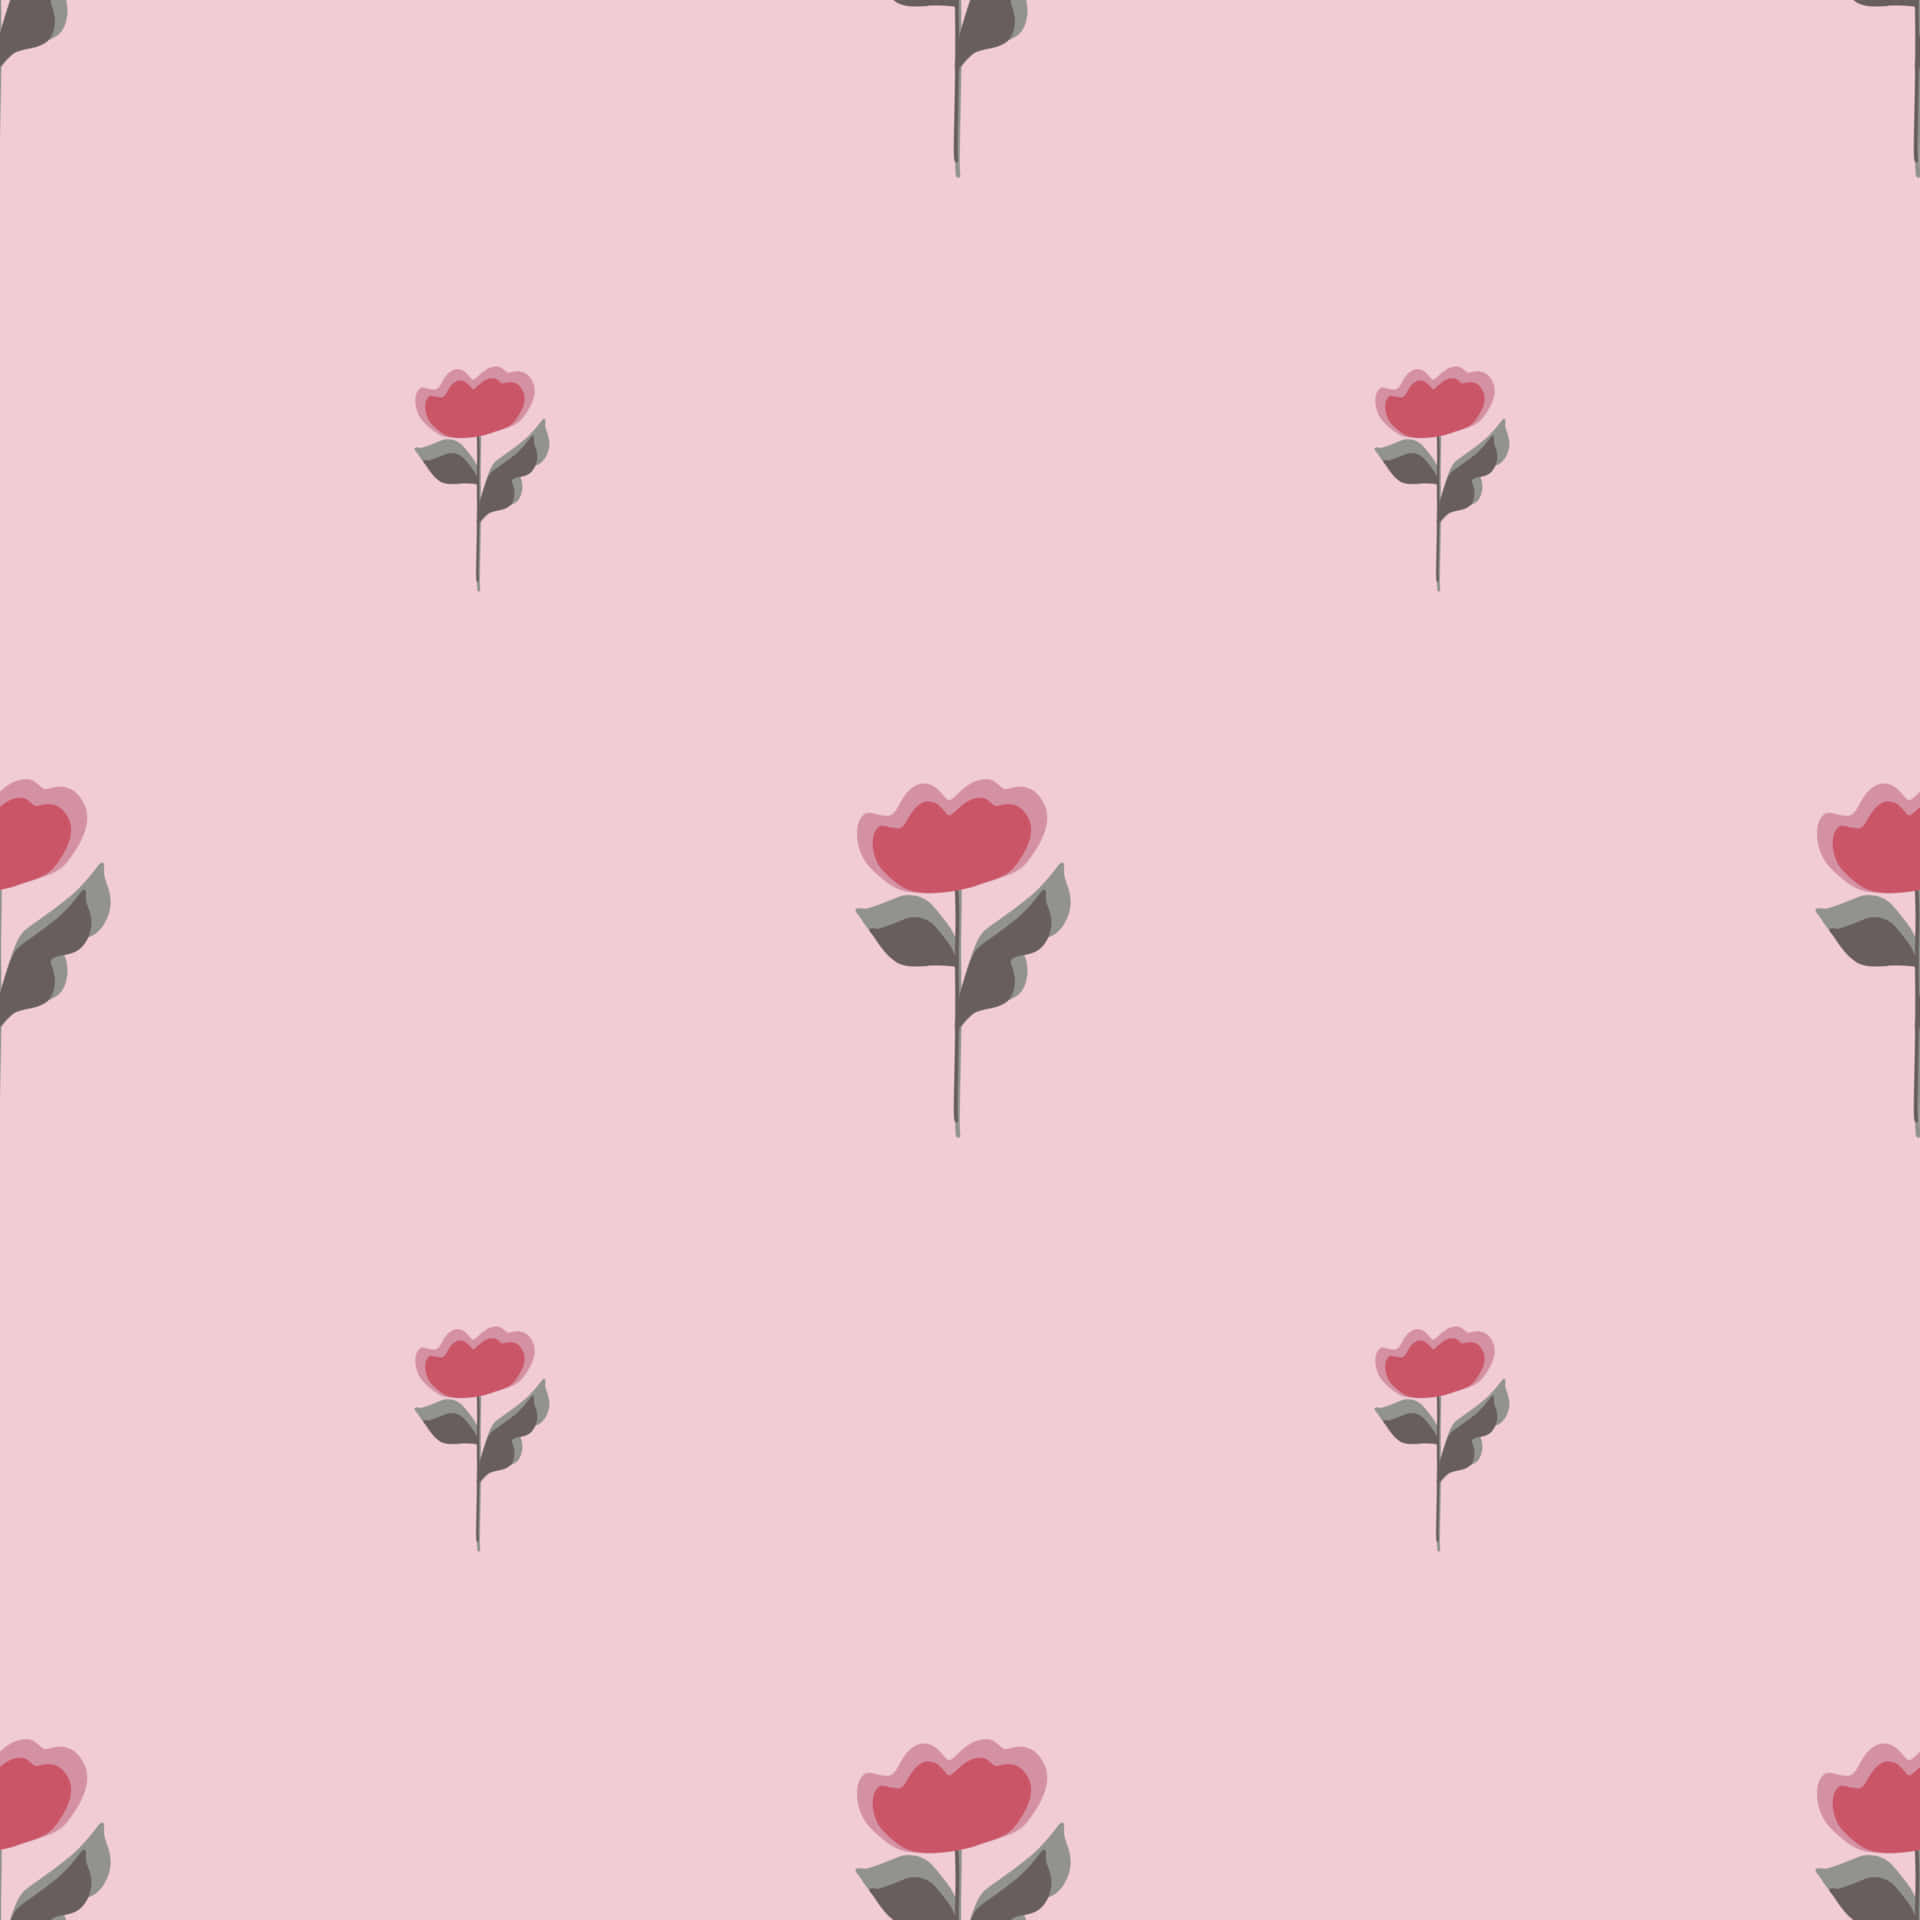 Captivating Cute Flower Background with Delicate Blossoms